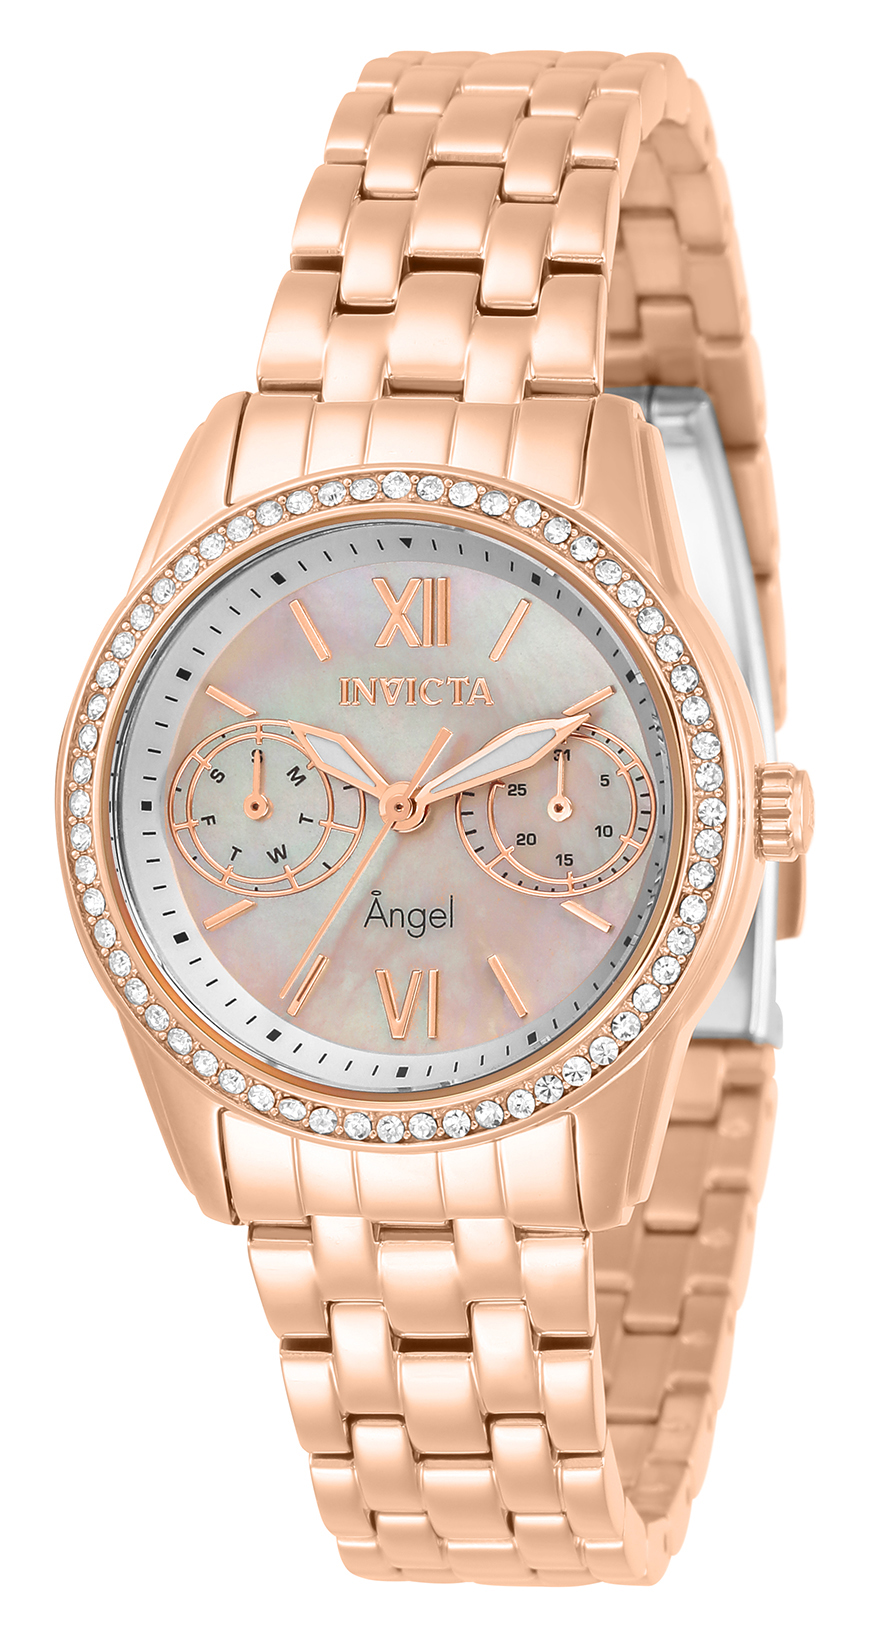 Invicta Angel Women's Watch w/ Mother of Pearl Dial - 32mm, Rose Gold (31383)